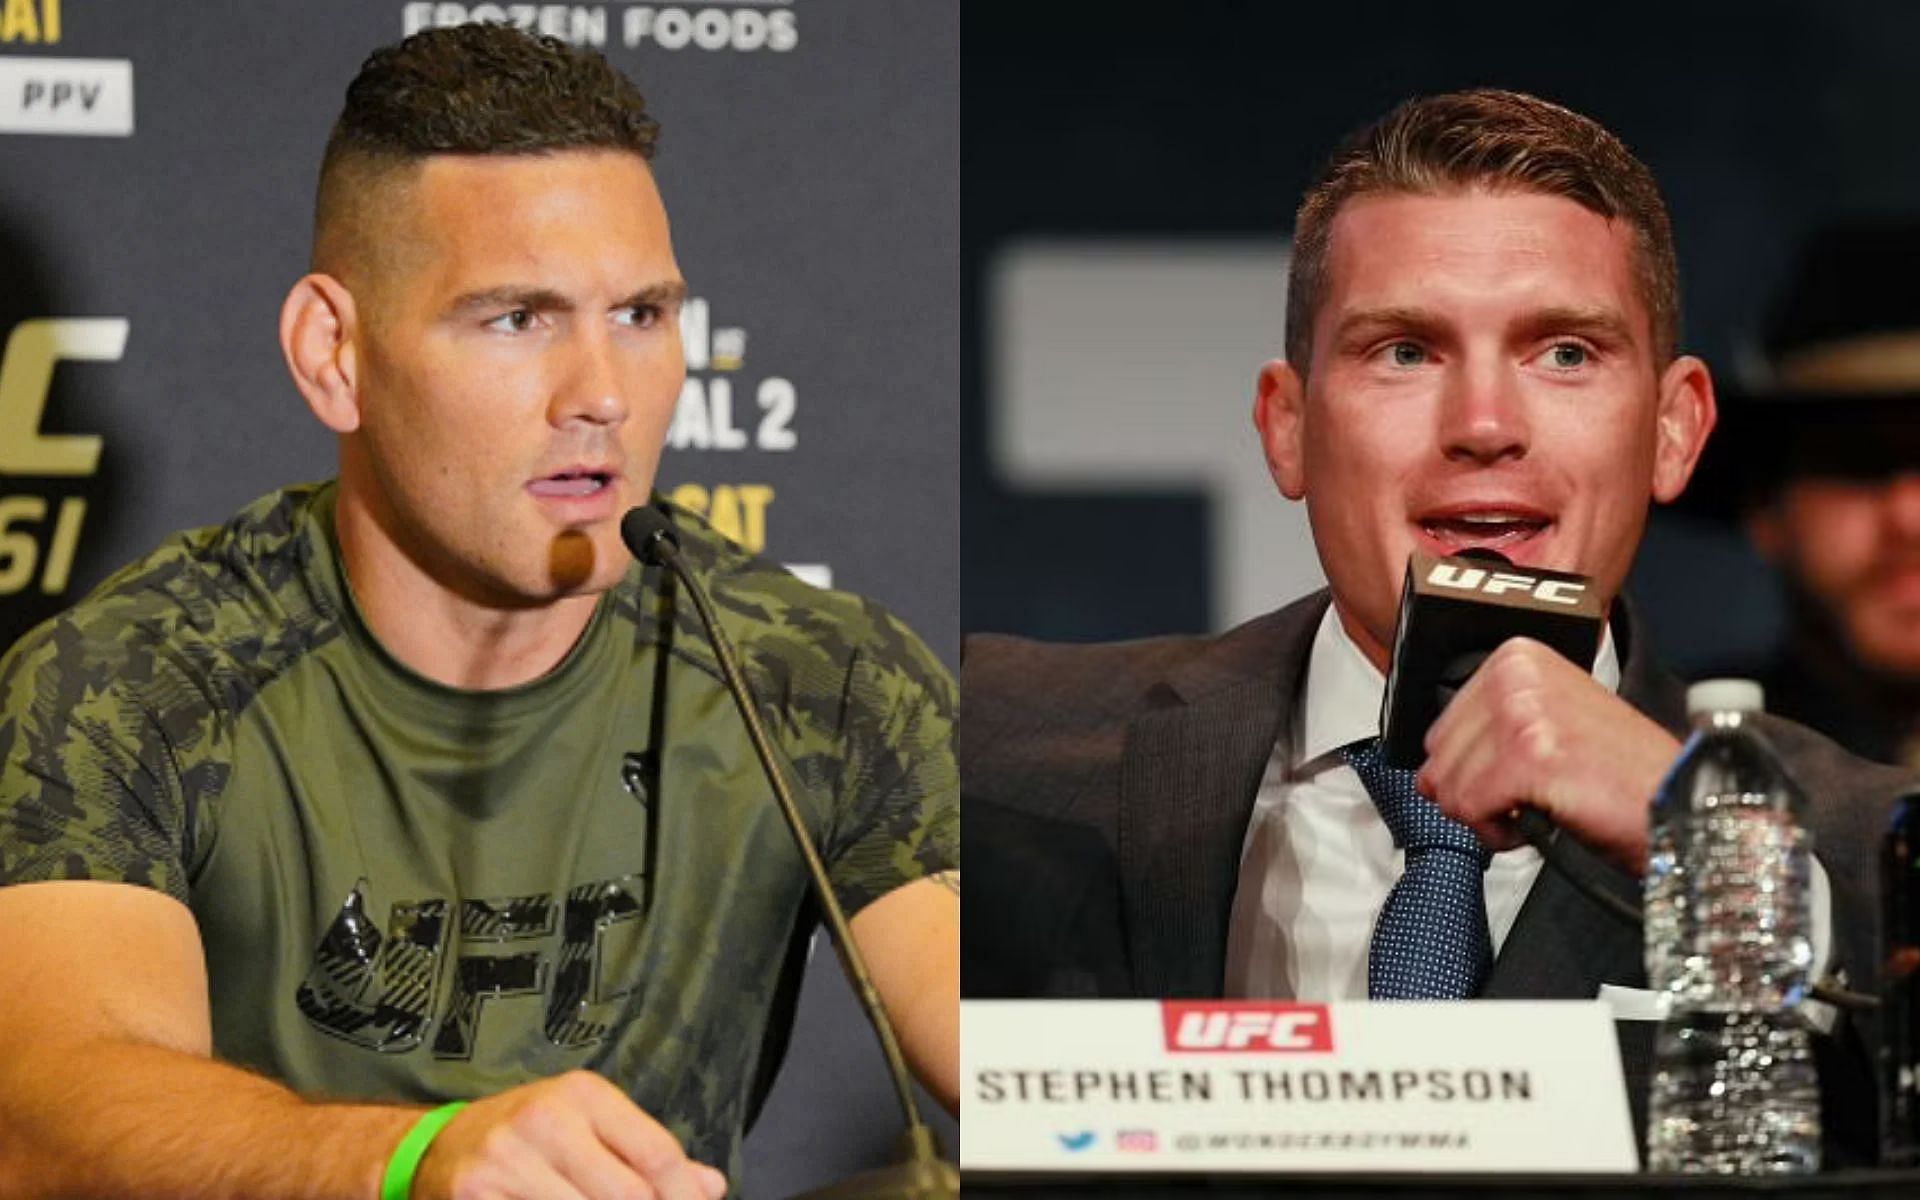 Chris Weidman (left) and Stephen Thompson (right)